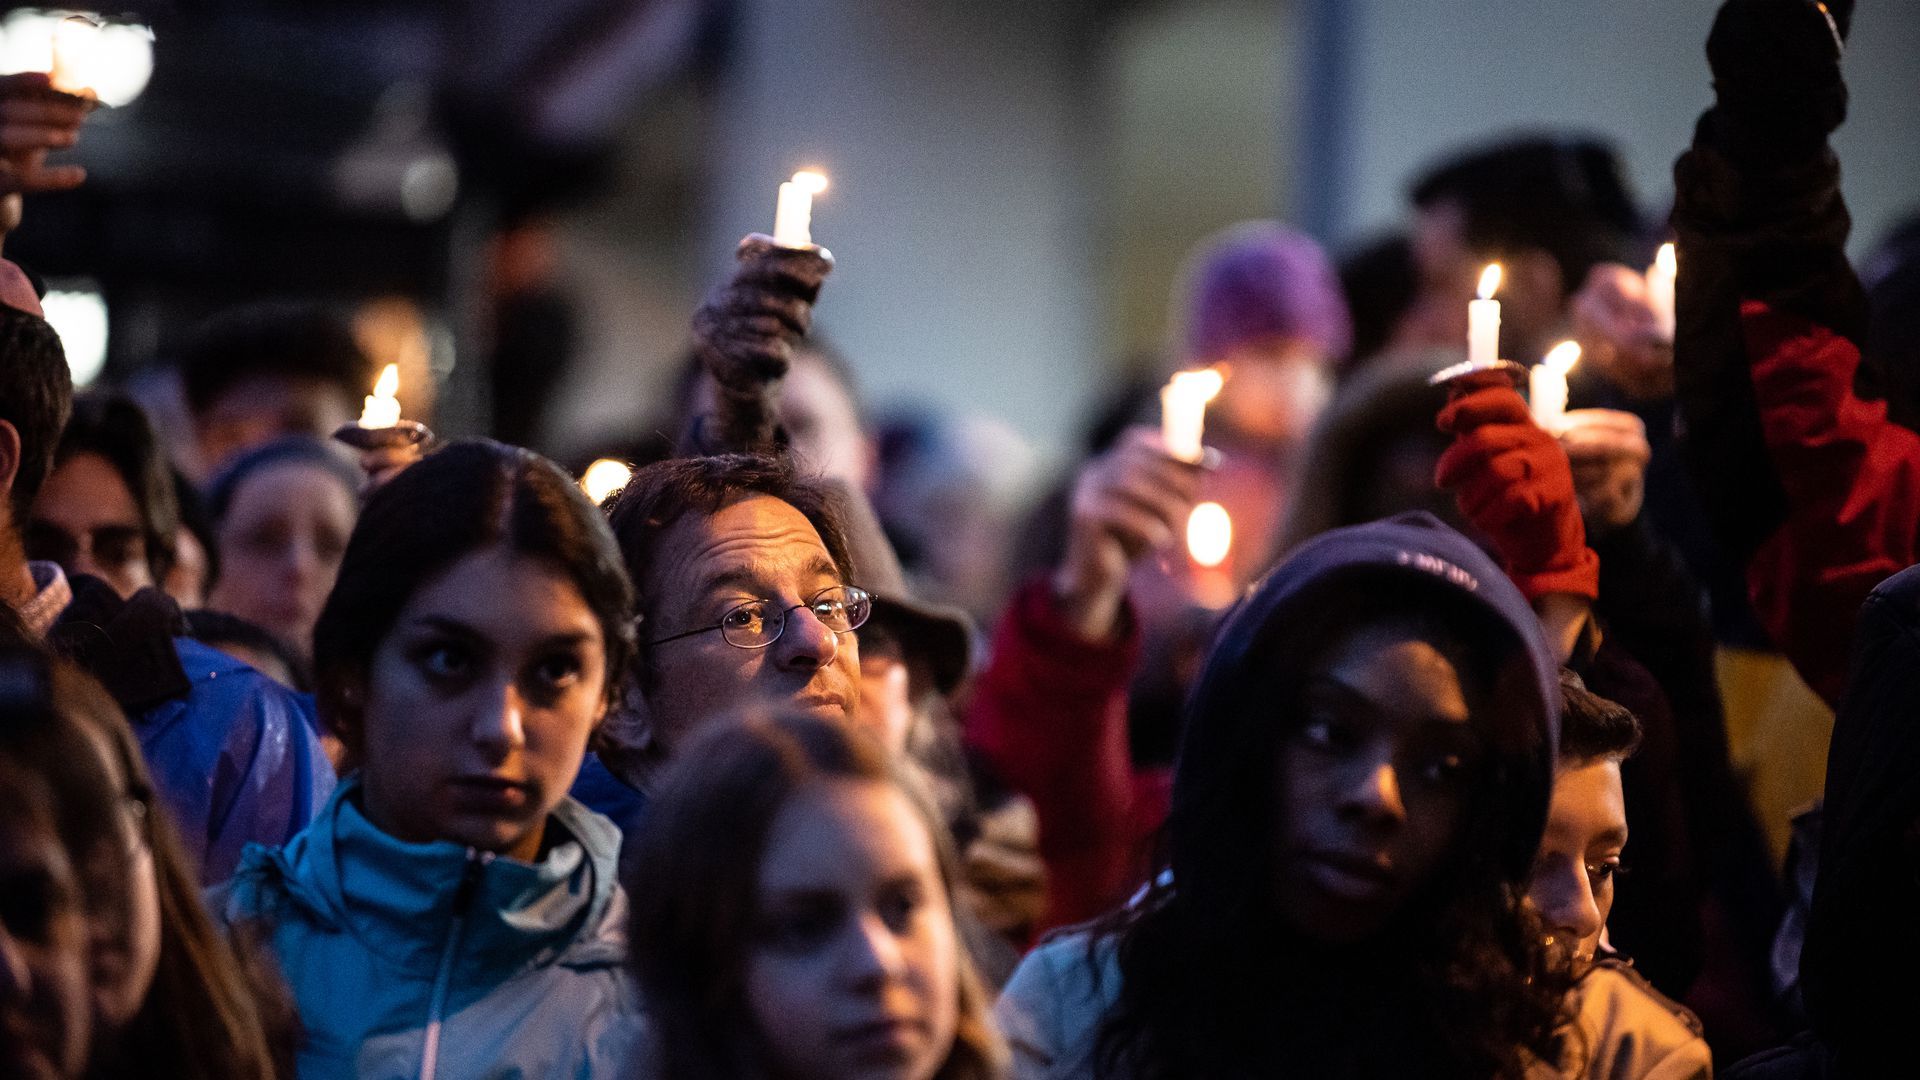 Candle light vigil for victims of Pittsburgh shooting